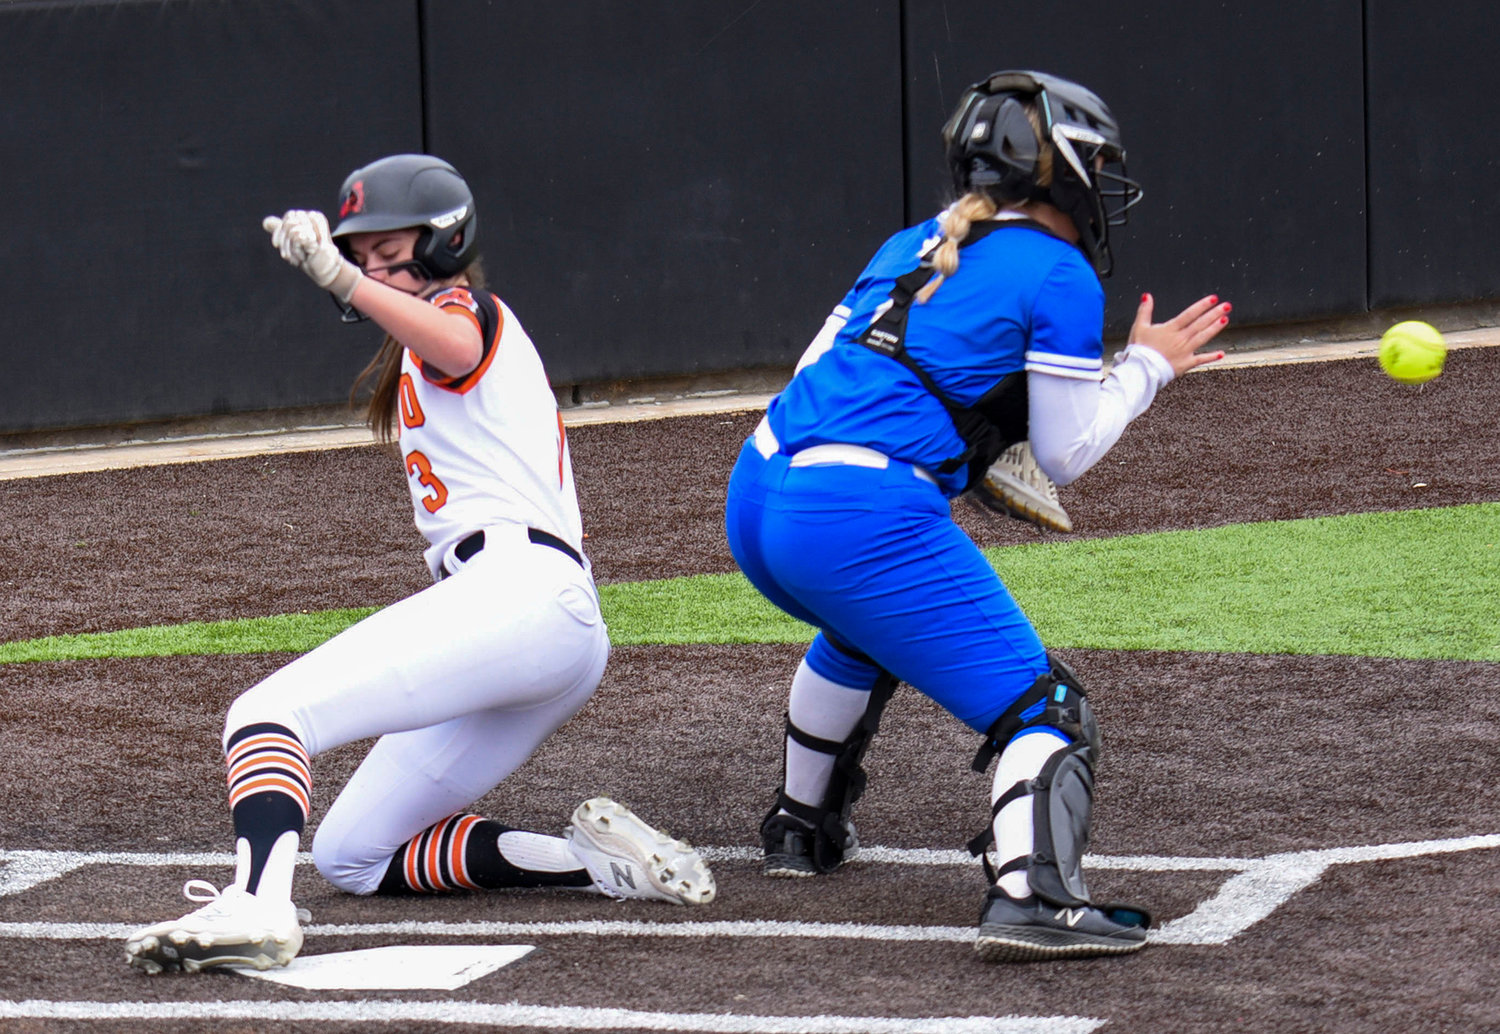 Reagan Davis slides safe into home plate March 15 during the Ladycats vs Brewer Bears game.